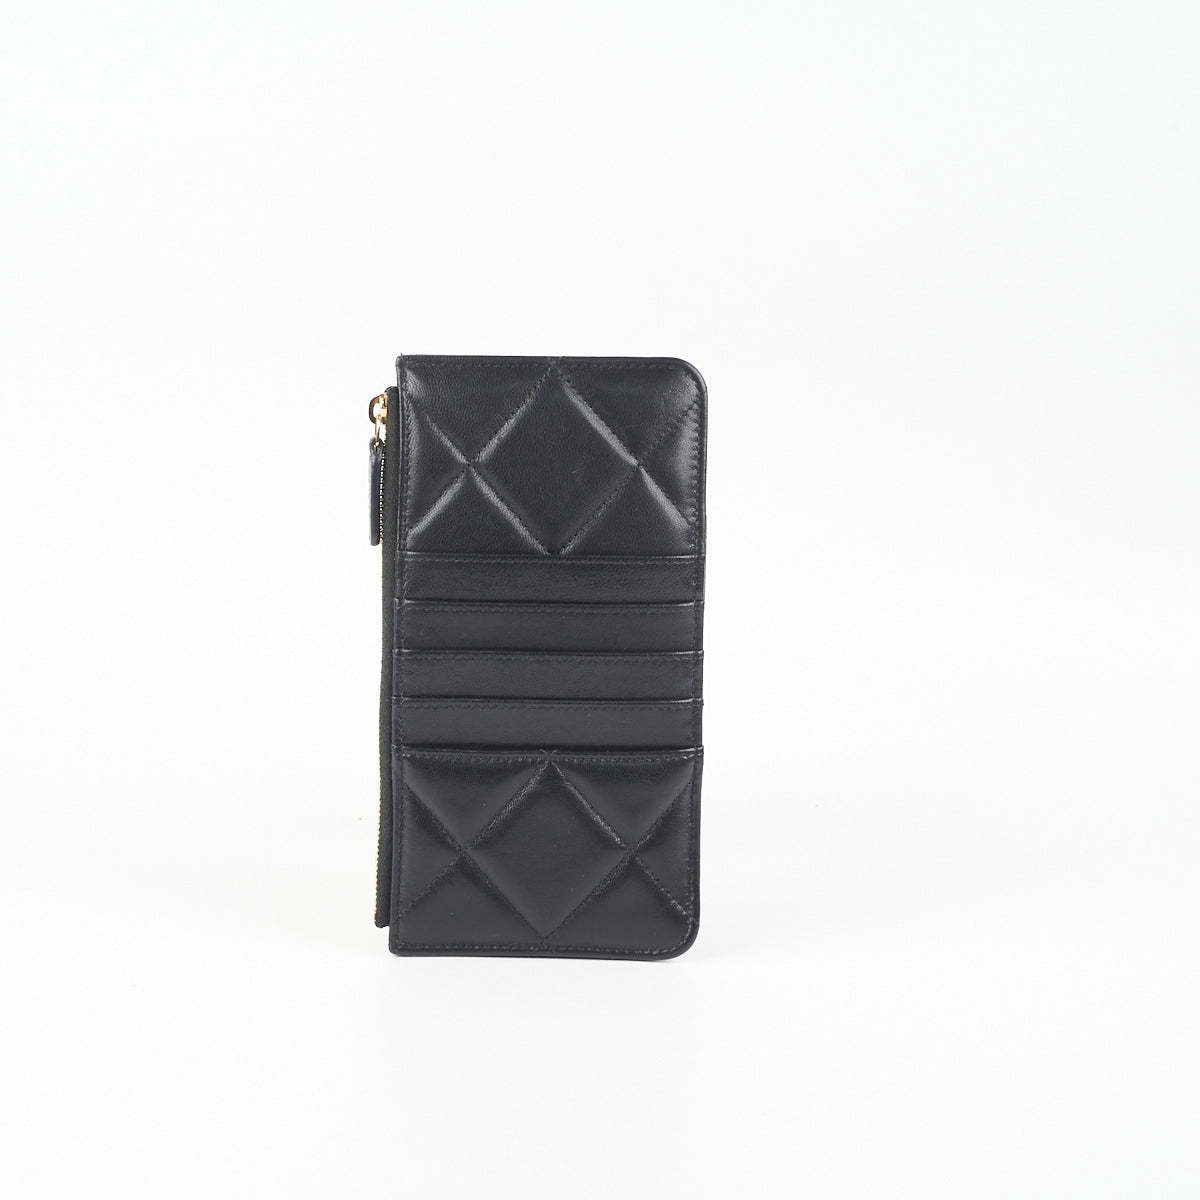 CHANEL Goatskin Quilted Chanel 19 Phone and Card Holder Black 1241095